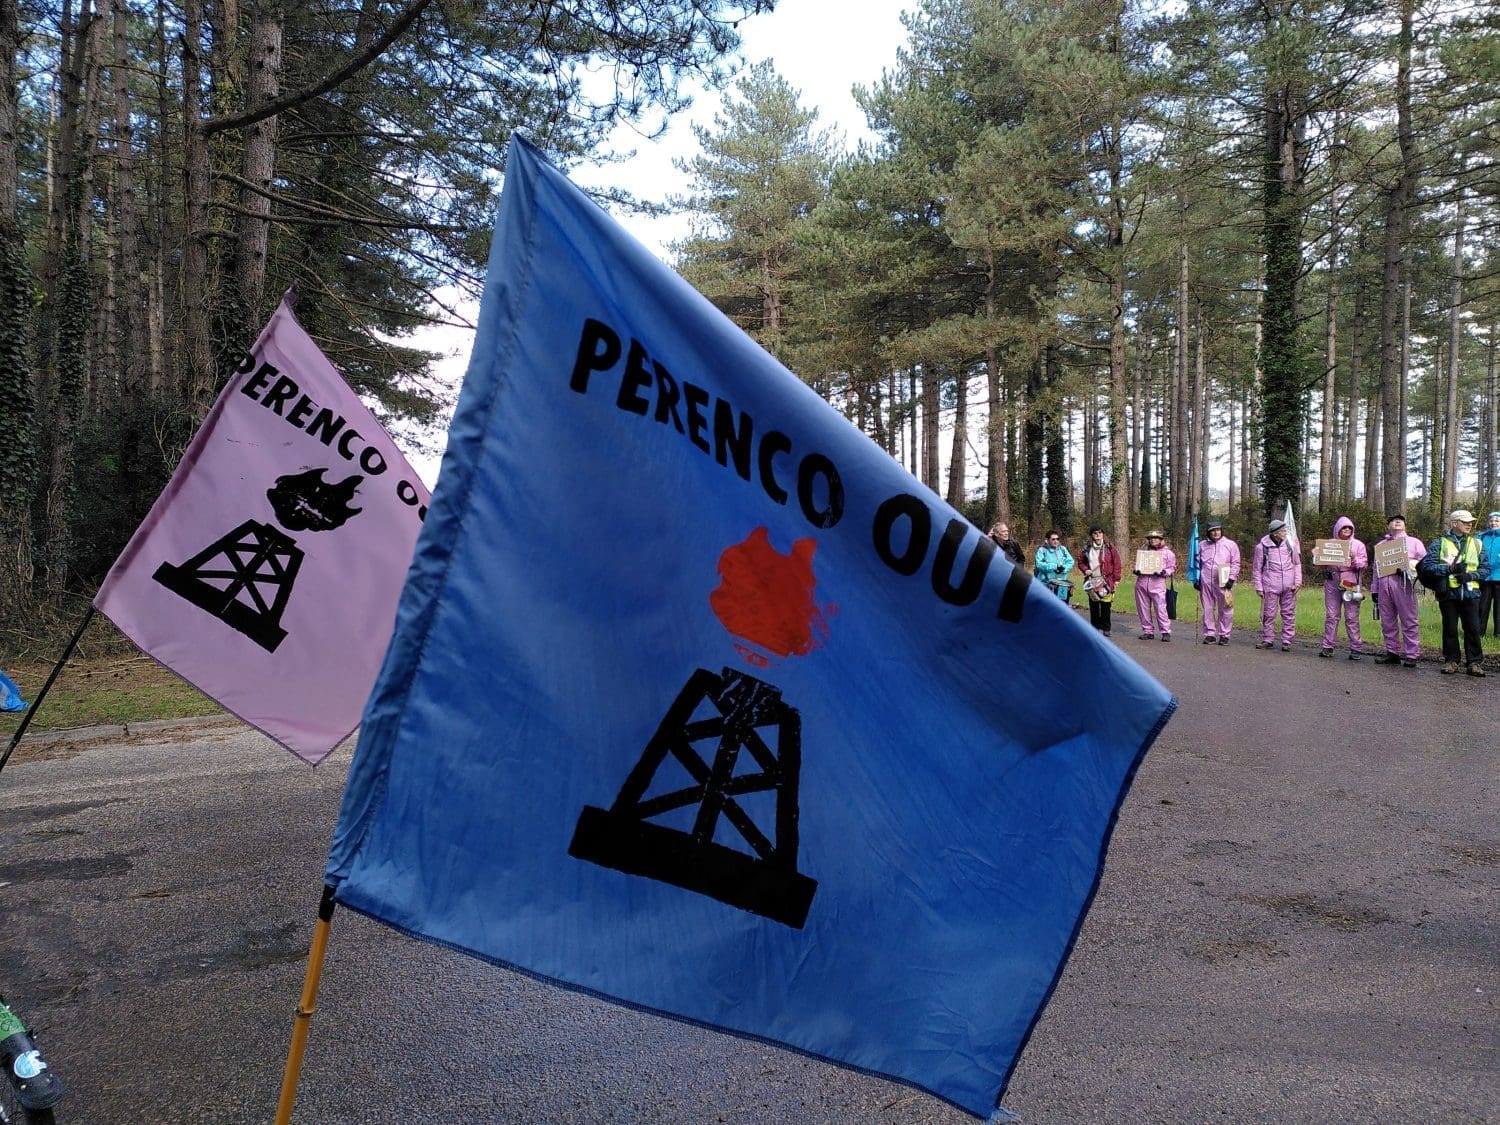 "Perenco Out" flags blow in the wind near the entrance to Wytch Farm.